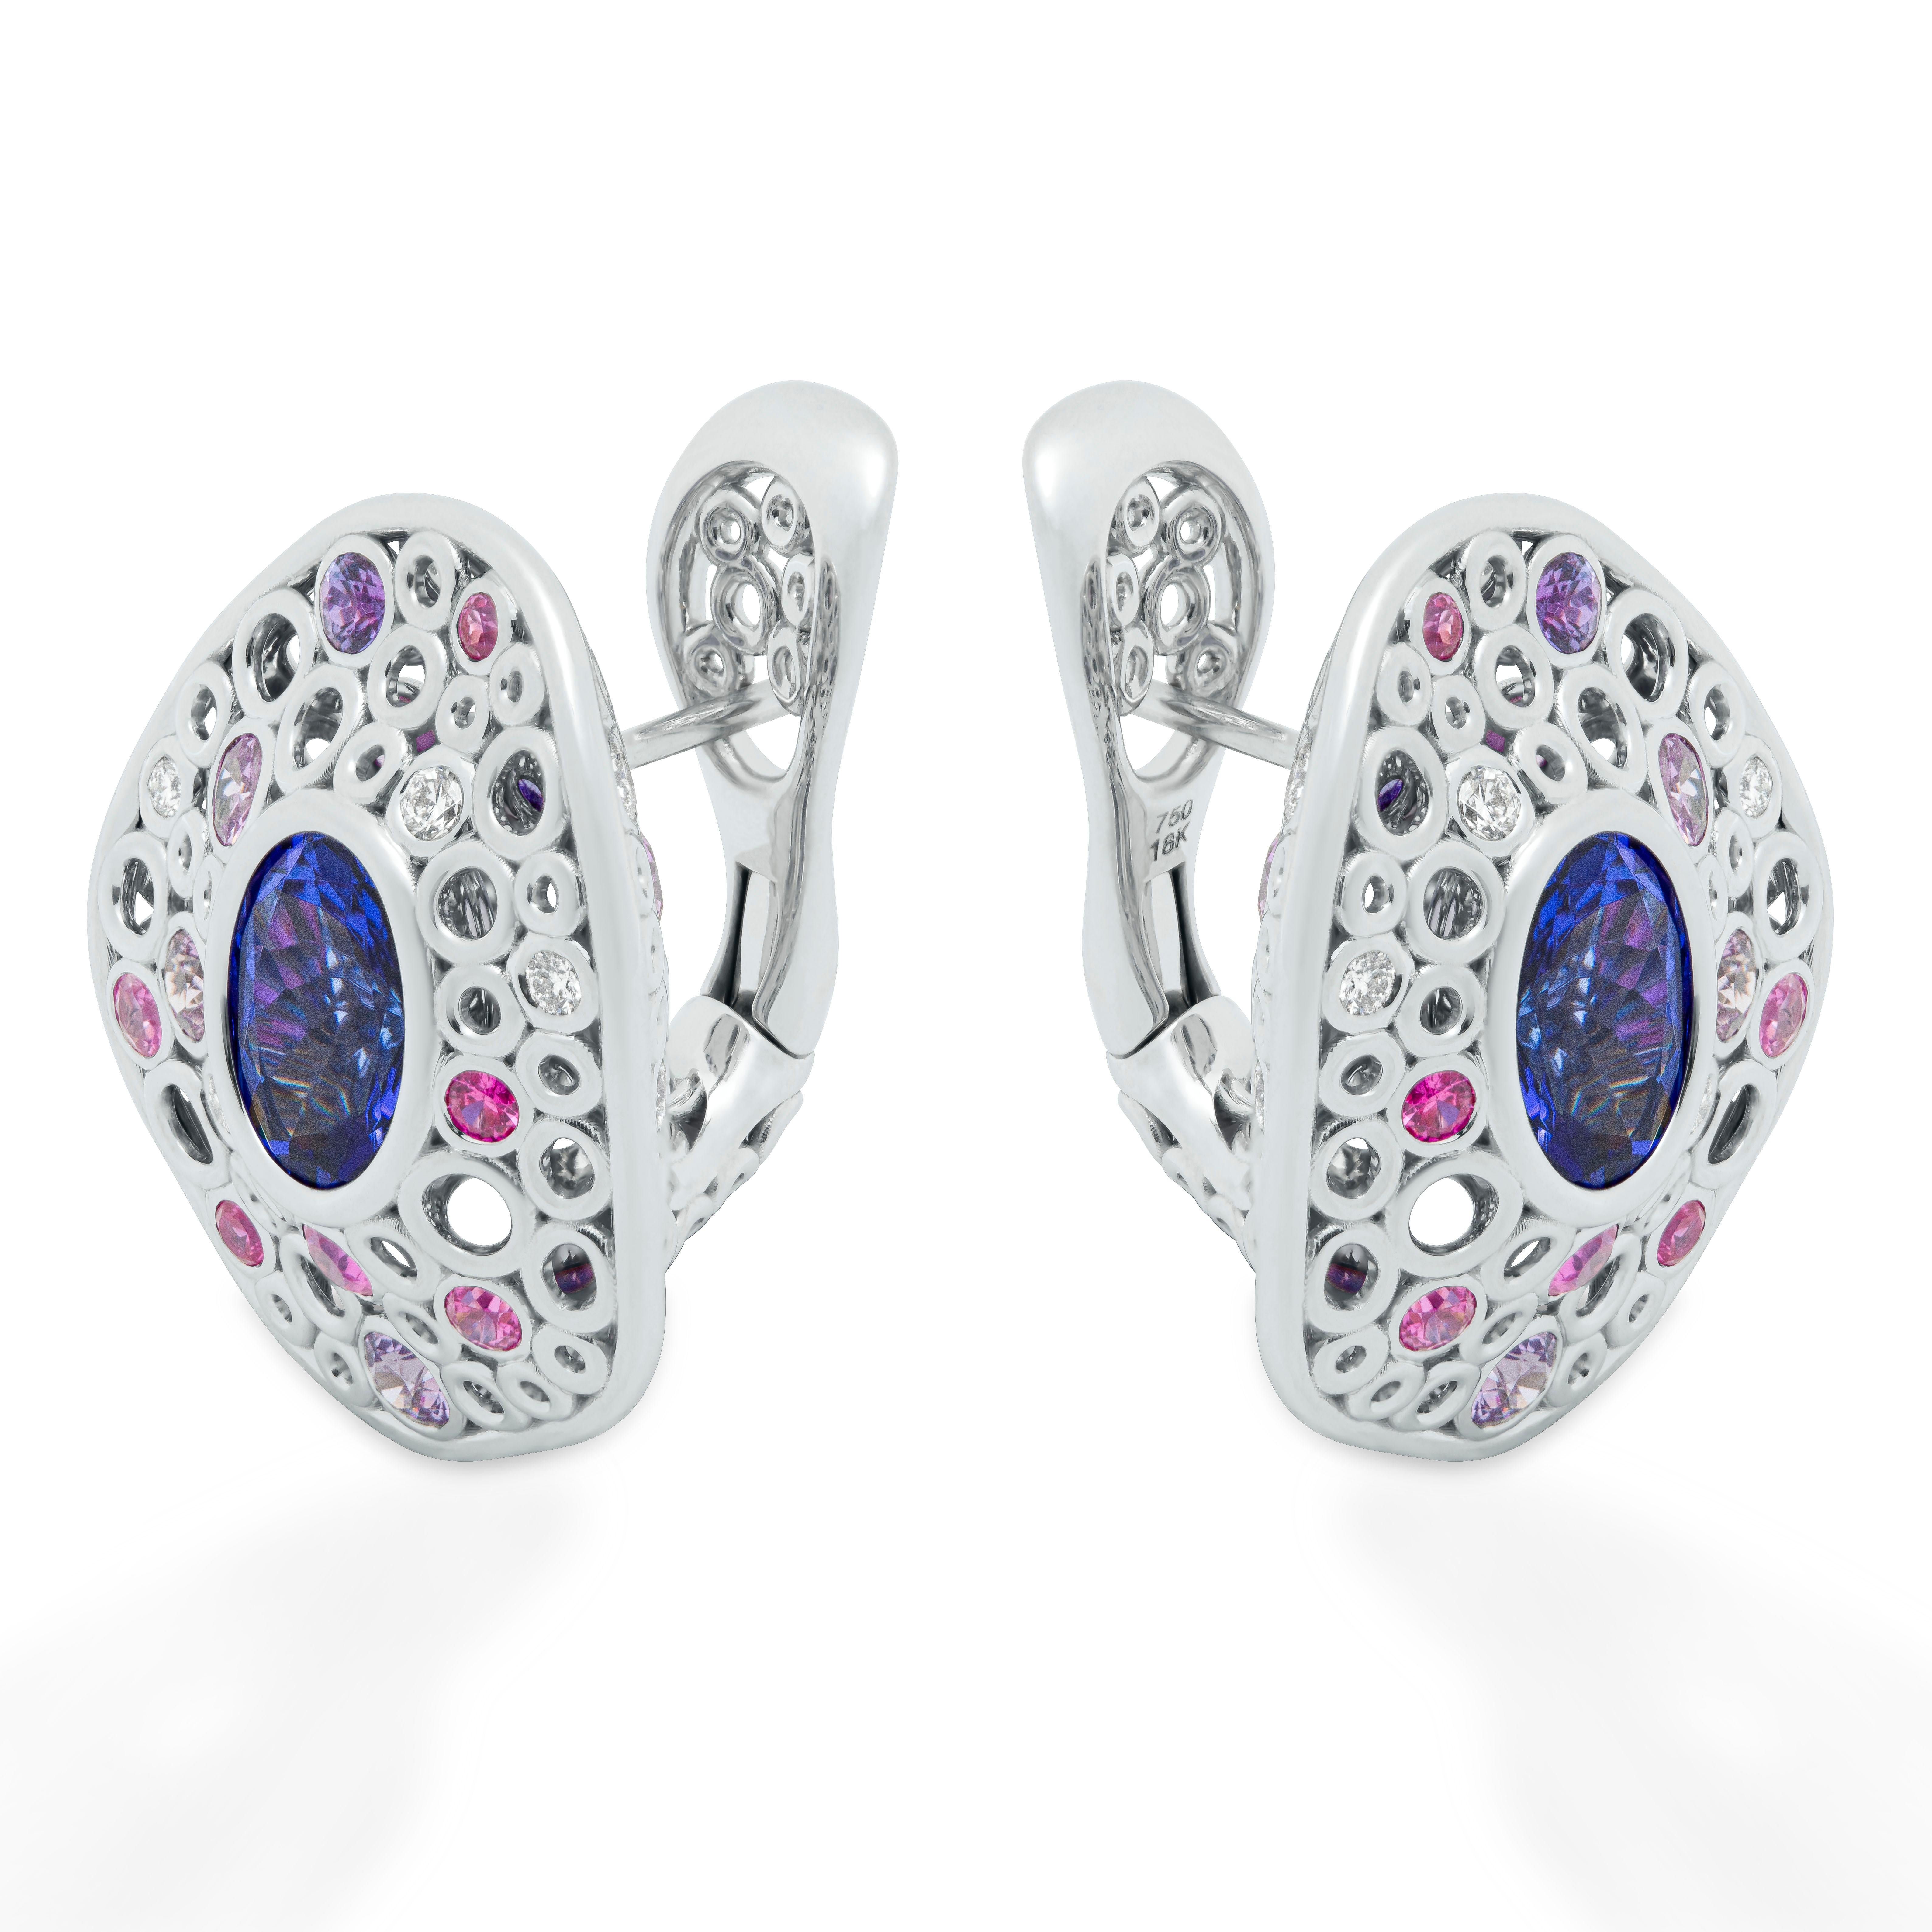 Tanzanite 5.99 Carat Diamonds Sapphires 18 Karat White Gold Bubble Earrings
Incredibly light and airy Earrings from our Bubbles Collection. White 18 Karat Gold is made in the form of variety of small bubbles, some of which have 12 Pink and 22 Purple